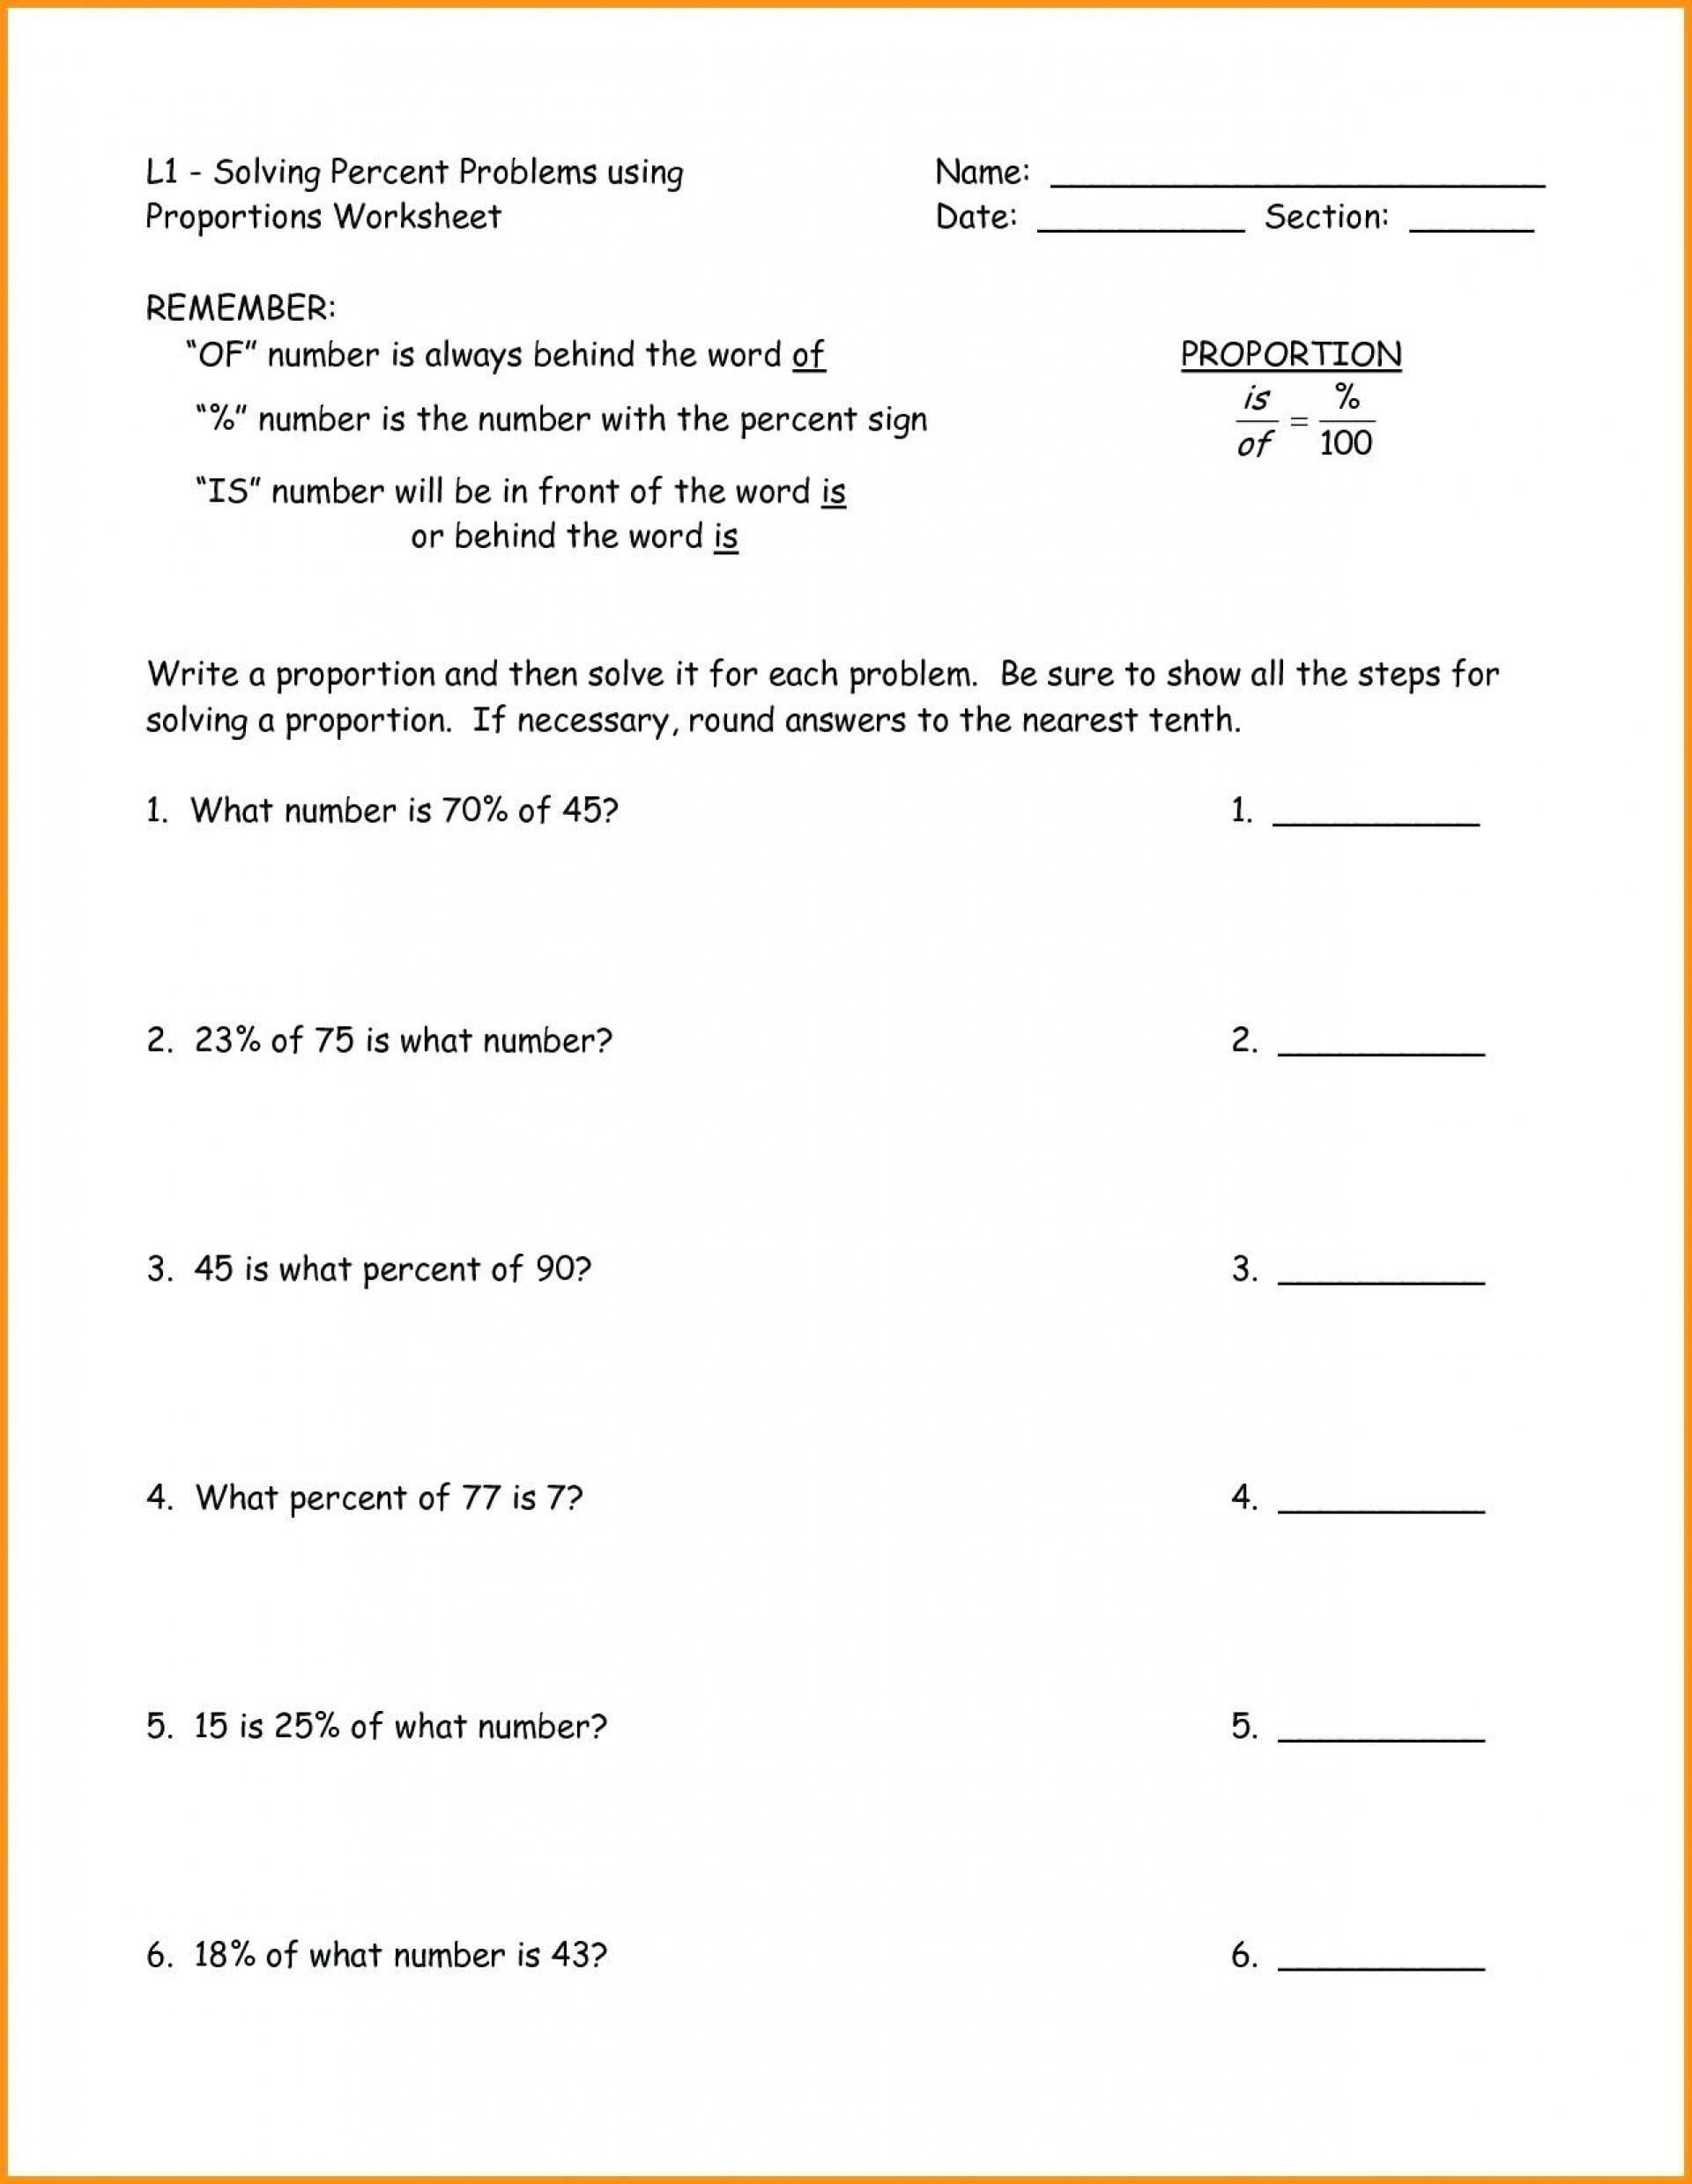 problem solving questions for percentage